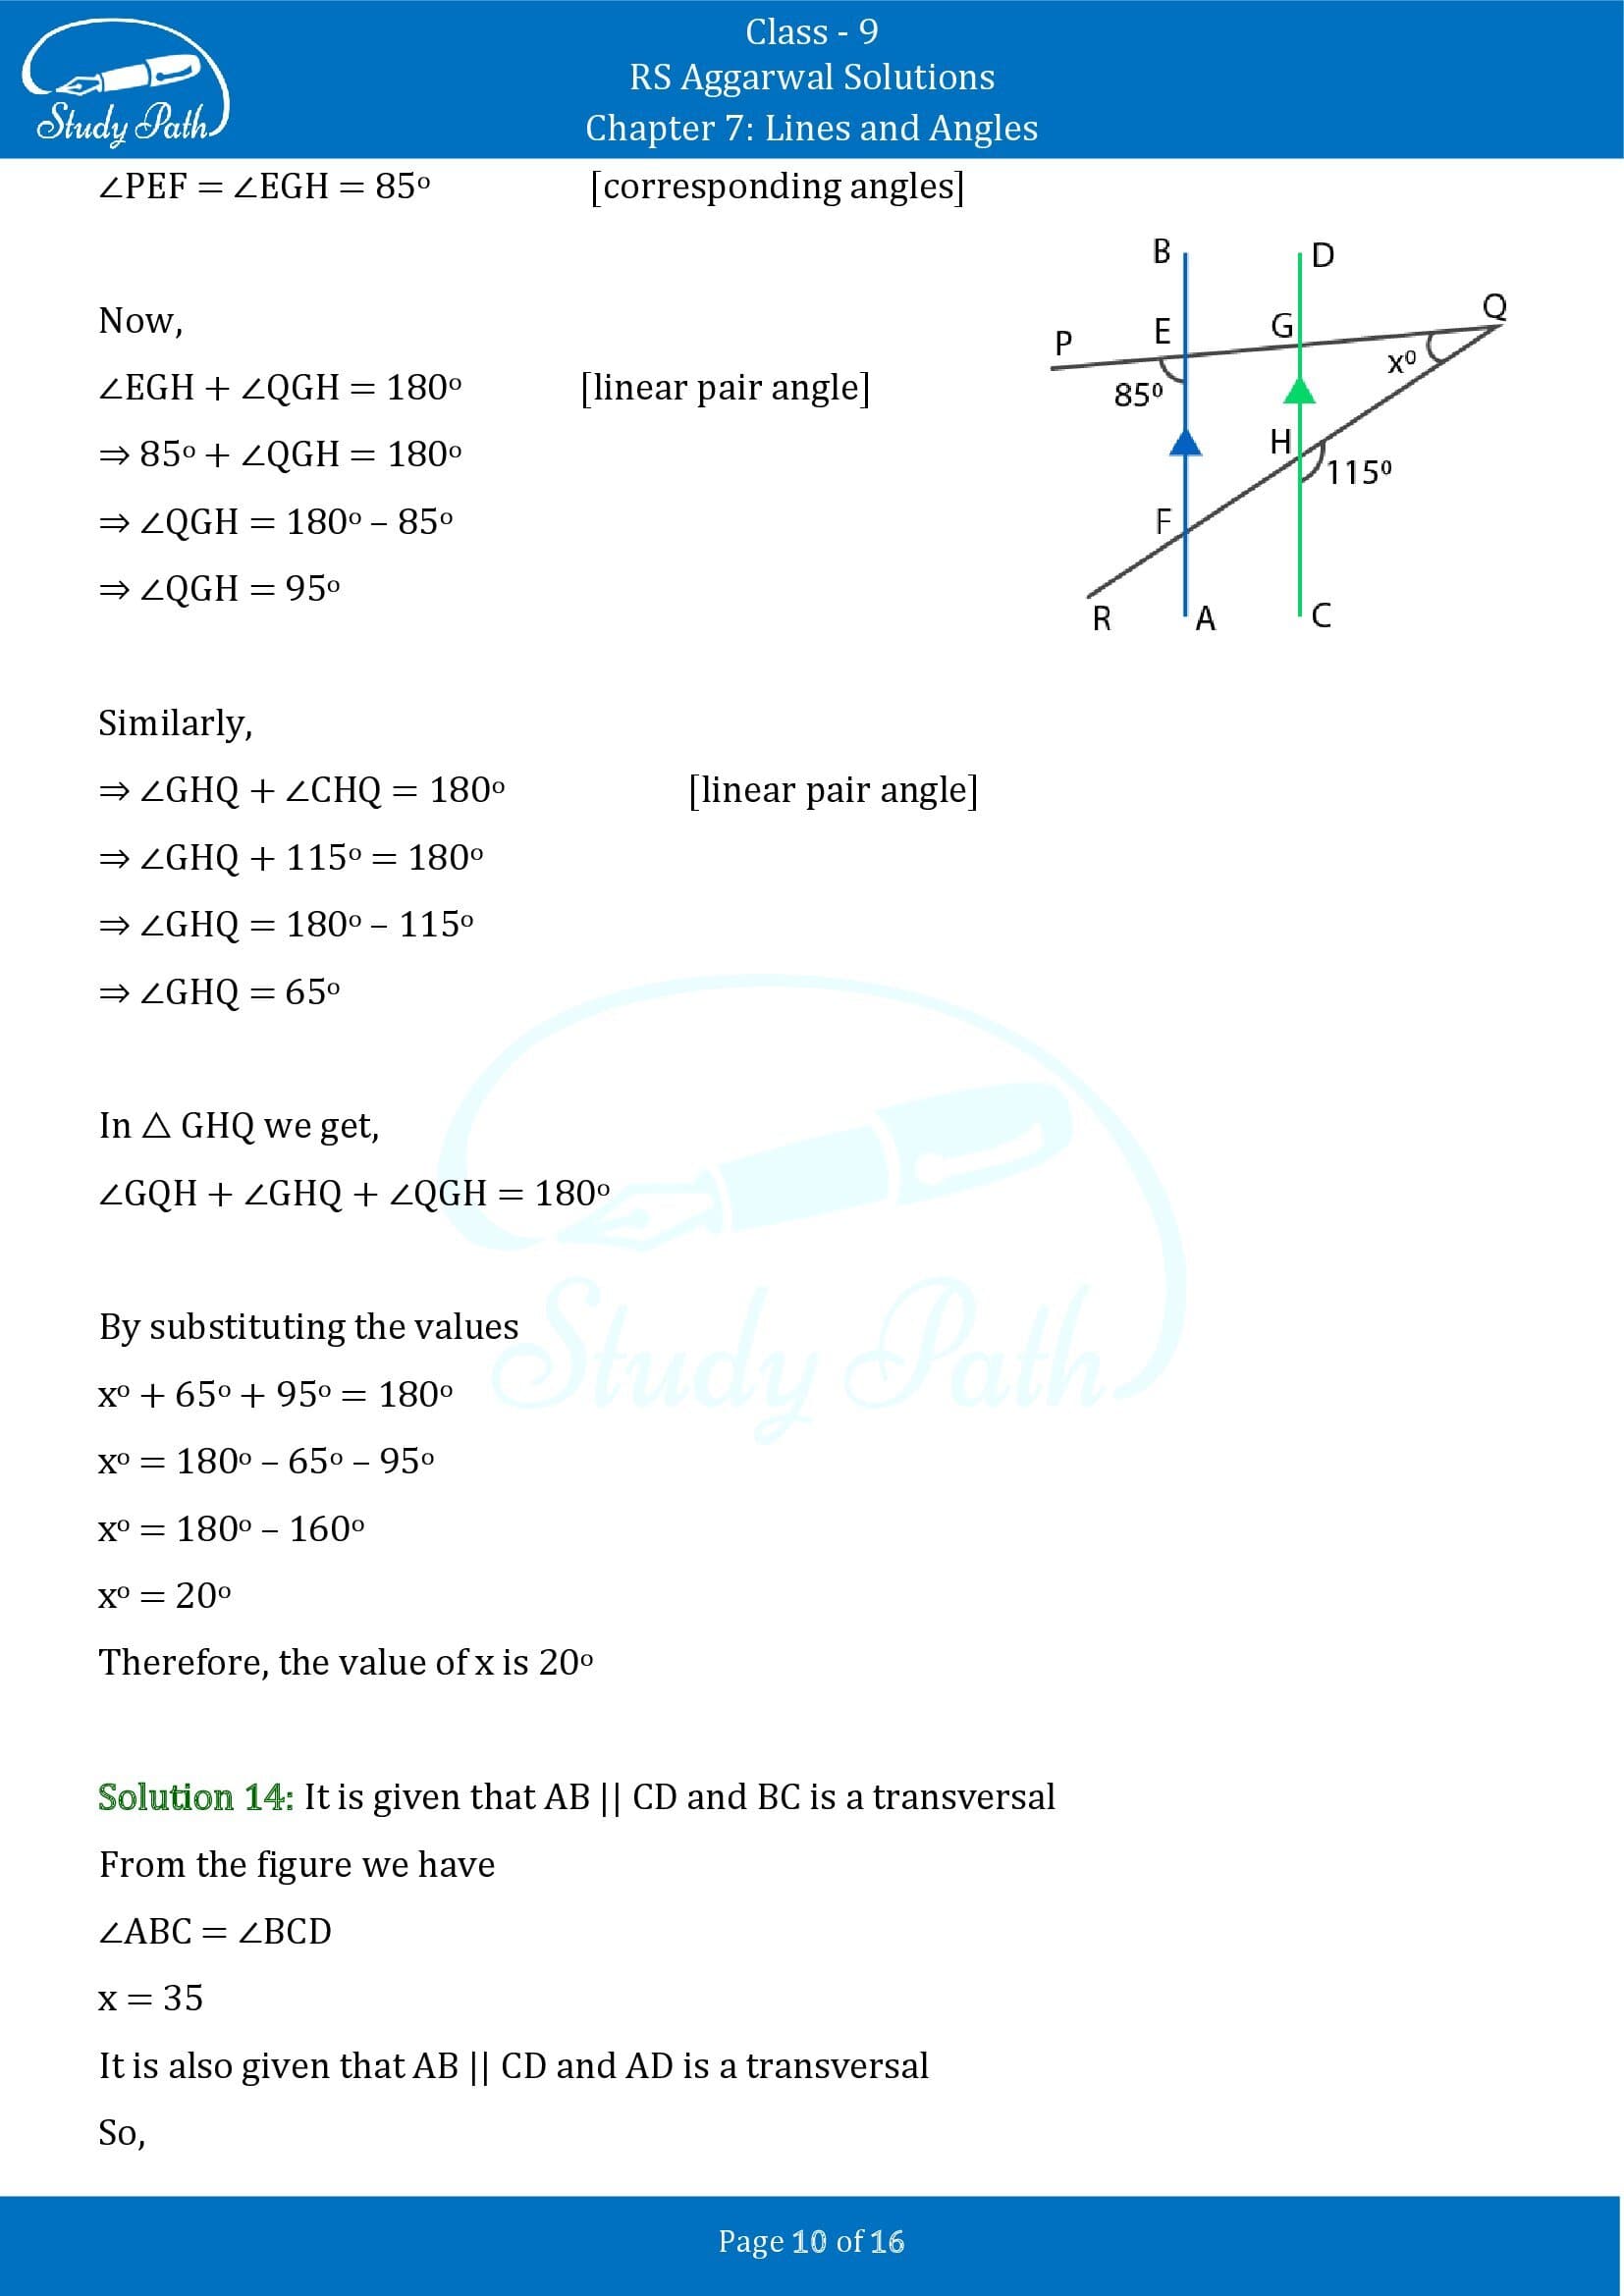 RS Aggarwal Solutions Class 9 Chapter 7 Lines and Angles Exercise 7C 00010